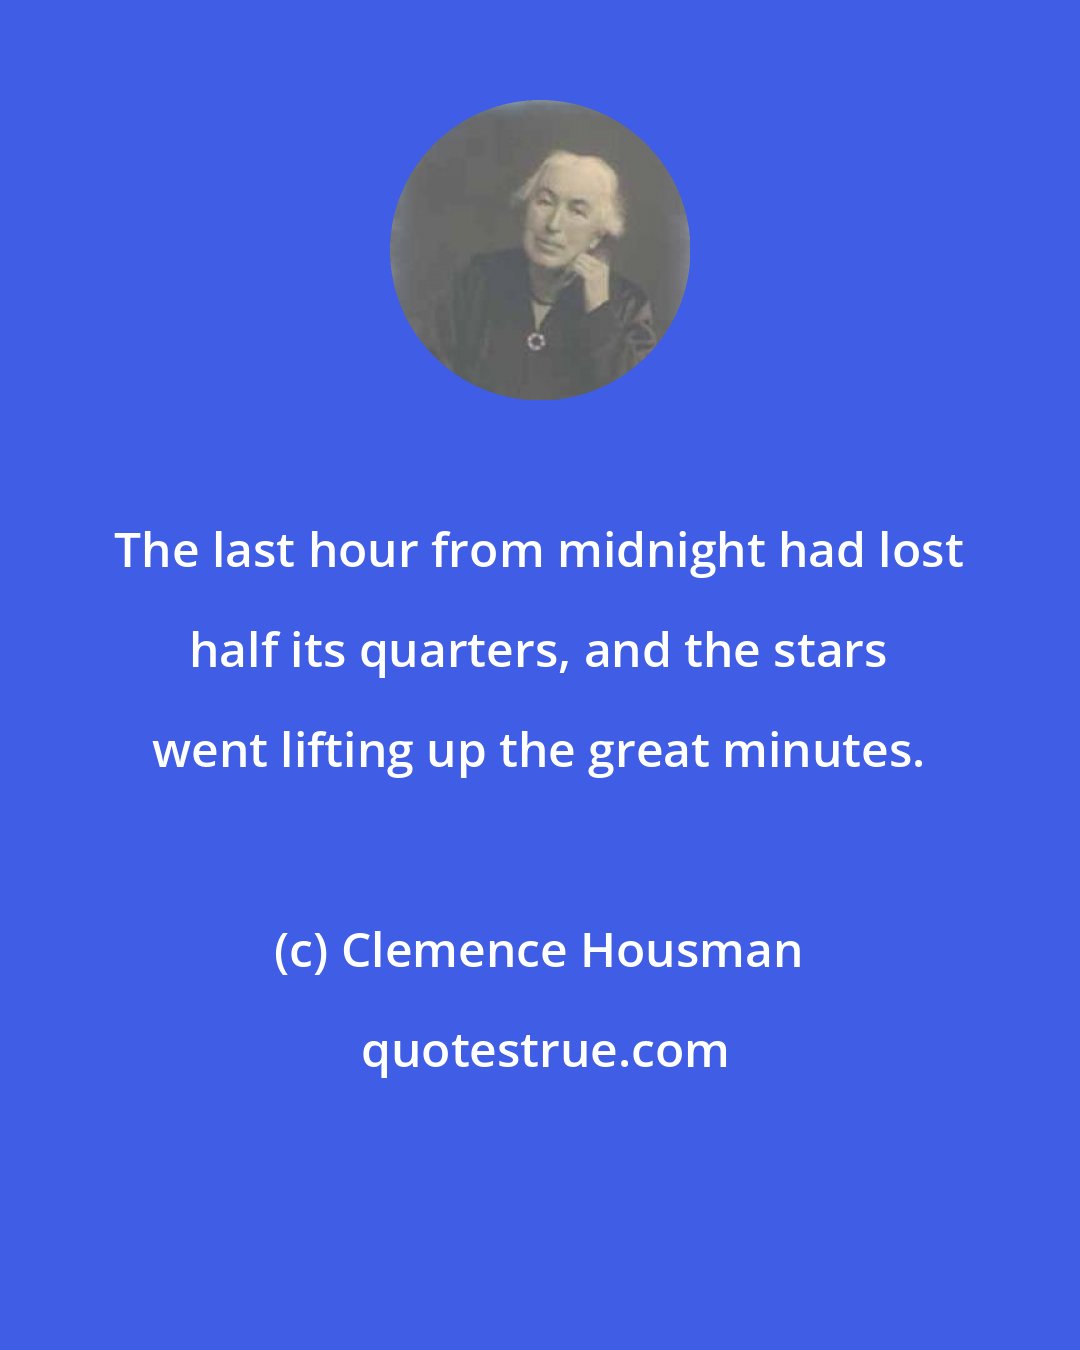 Clemence Housman: The last hour from midnight had lost half its quarters, and the stars went lifting up the great minutes.